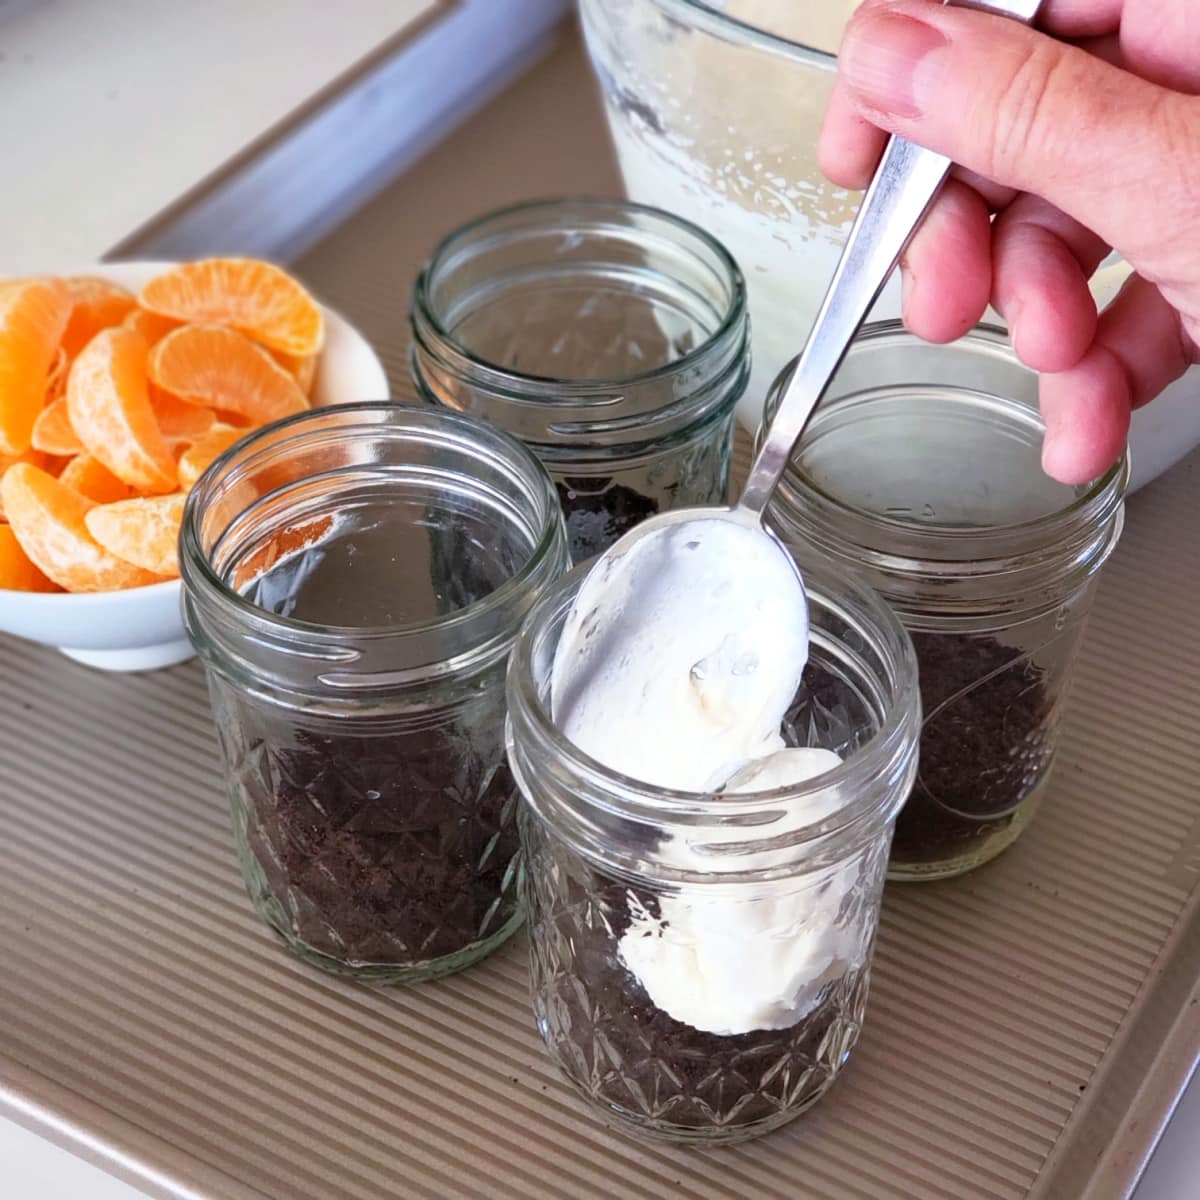 A hand holds a spoon that is dolloping cheesecake filling into jars that have chocolate cookie crumbs at the bottom. A bowl of tangerine segments is at the left.